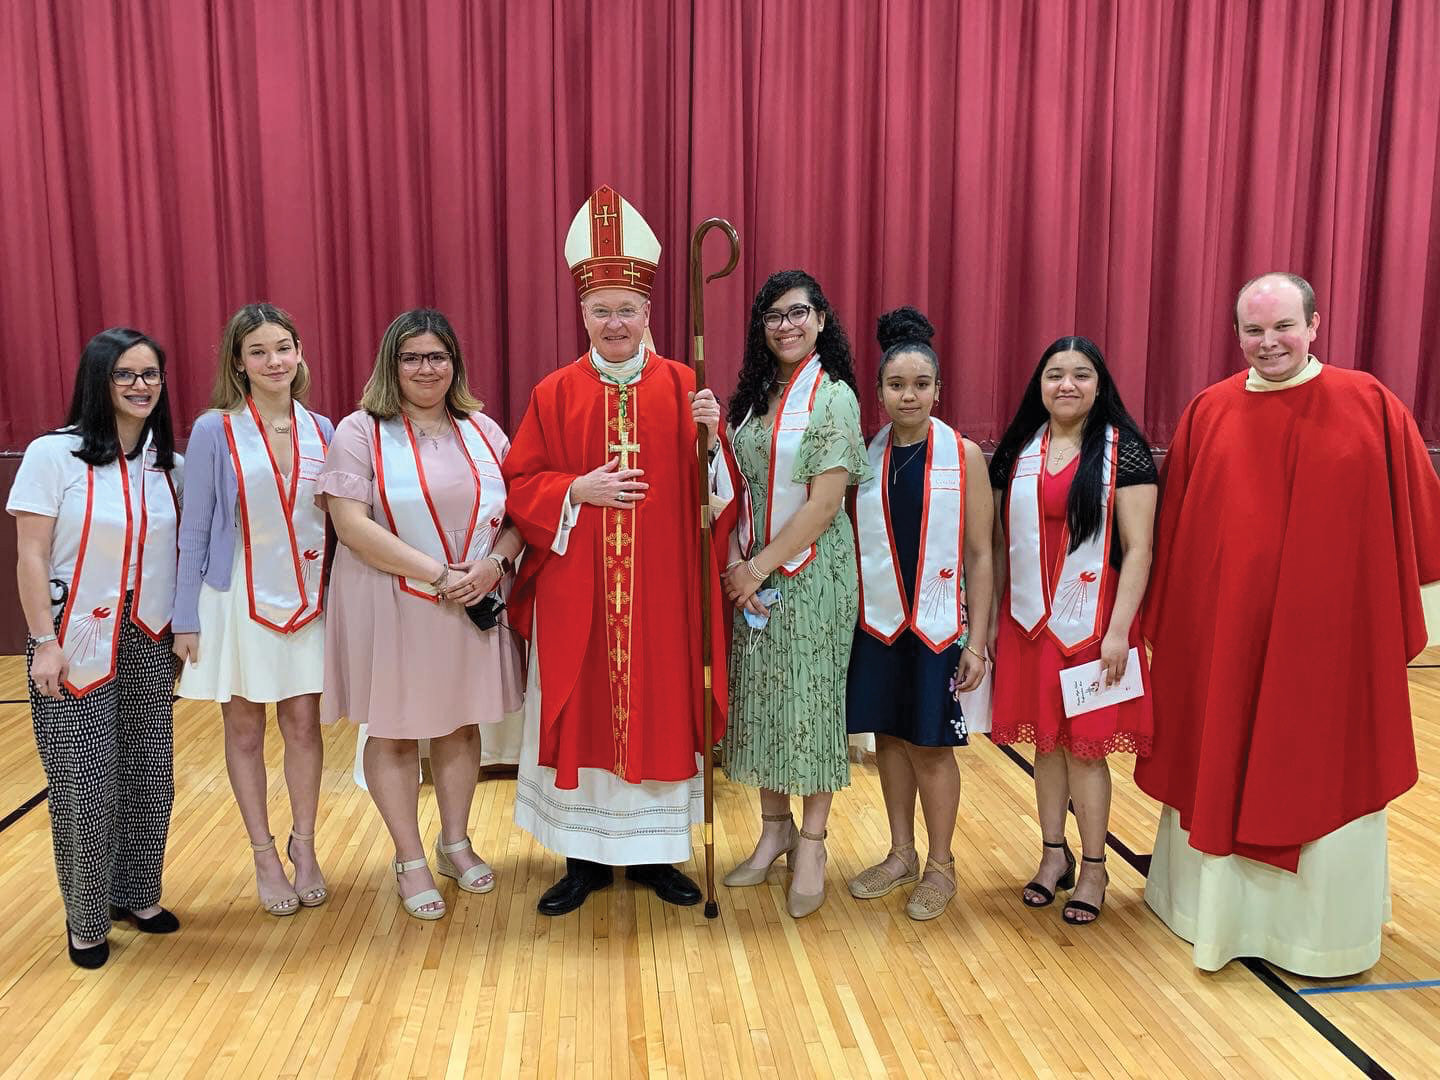 Six Preston High School students received the sacrament of confirmation May 19 at a Mass celebrated by Auxiliary Bishop Edmund Whalen and concelebrated by Father Paul Richmond, O. Carm., parochial vicar of St. Simon Stock parish in the Bronx. From left are Leidy Notaro, Christa Petriello, Maely Mercado, Bishop Whalen, Scarlett Hartman, Clara Suriel, Melissa Aquino and Father Richmond.